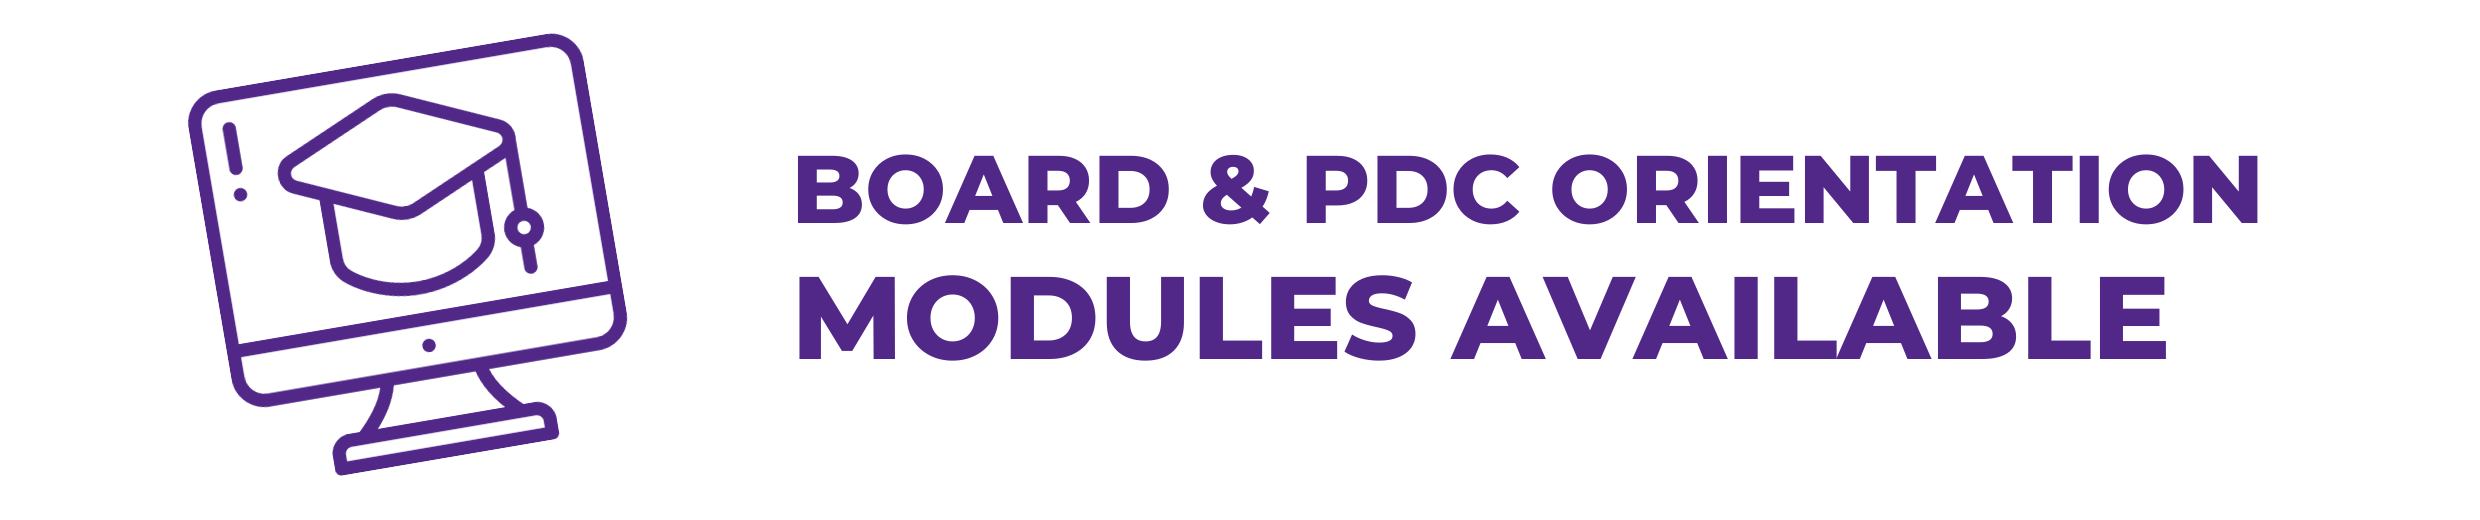 Board and PDC Orientation Modules Available